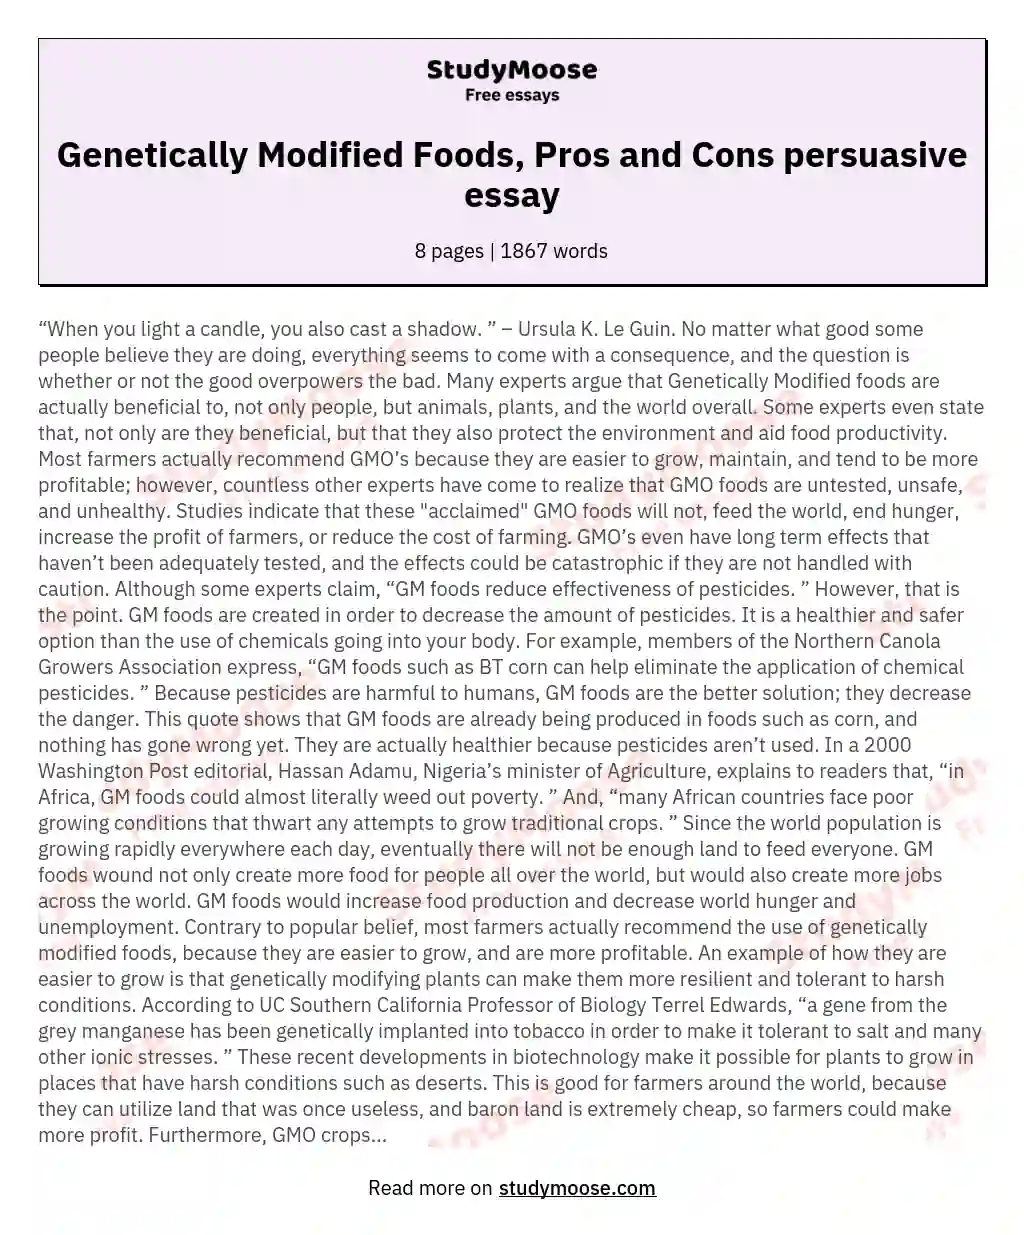 pros and cons of genetically modified food essay